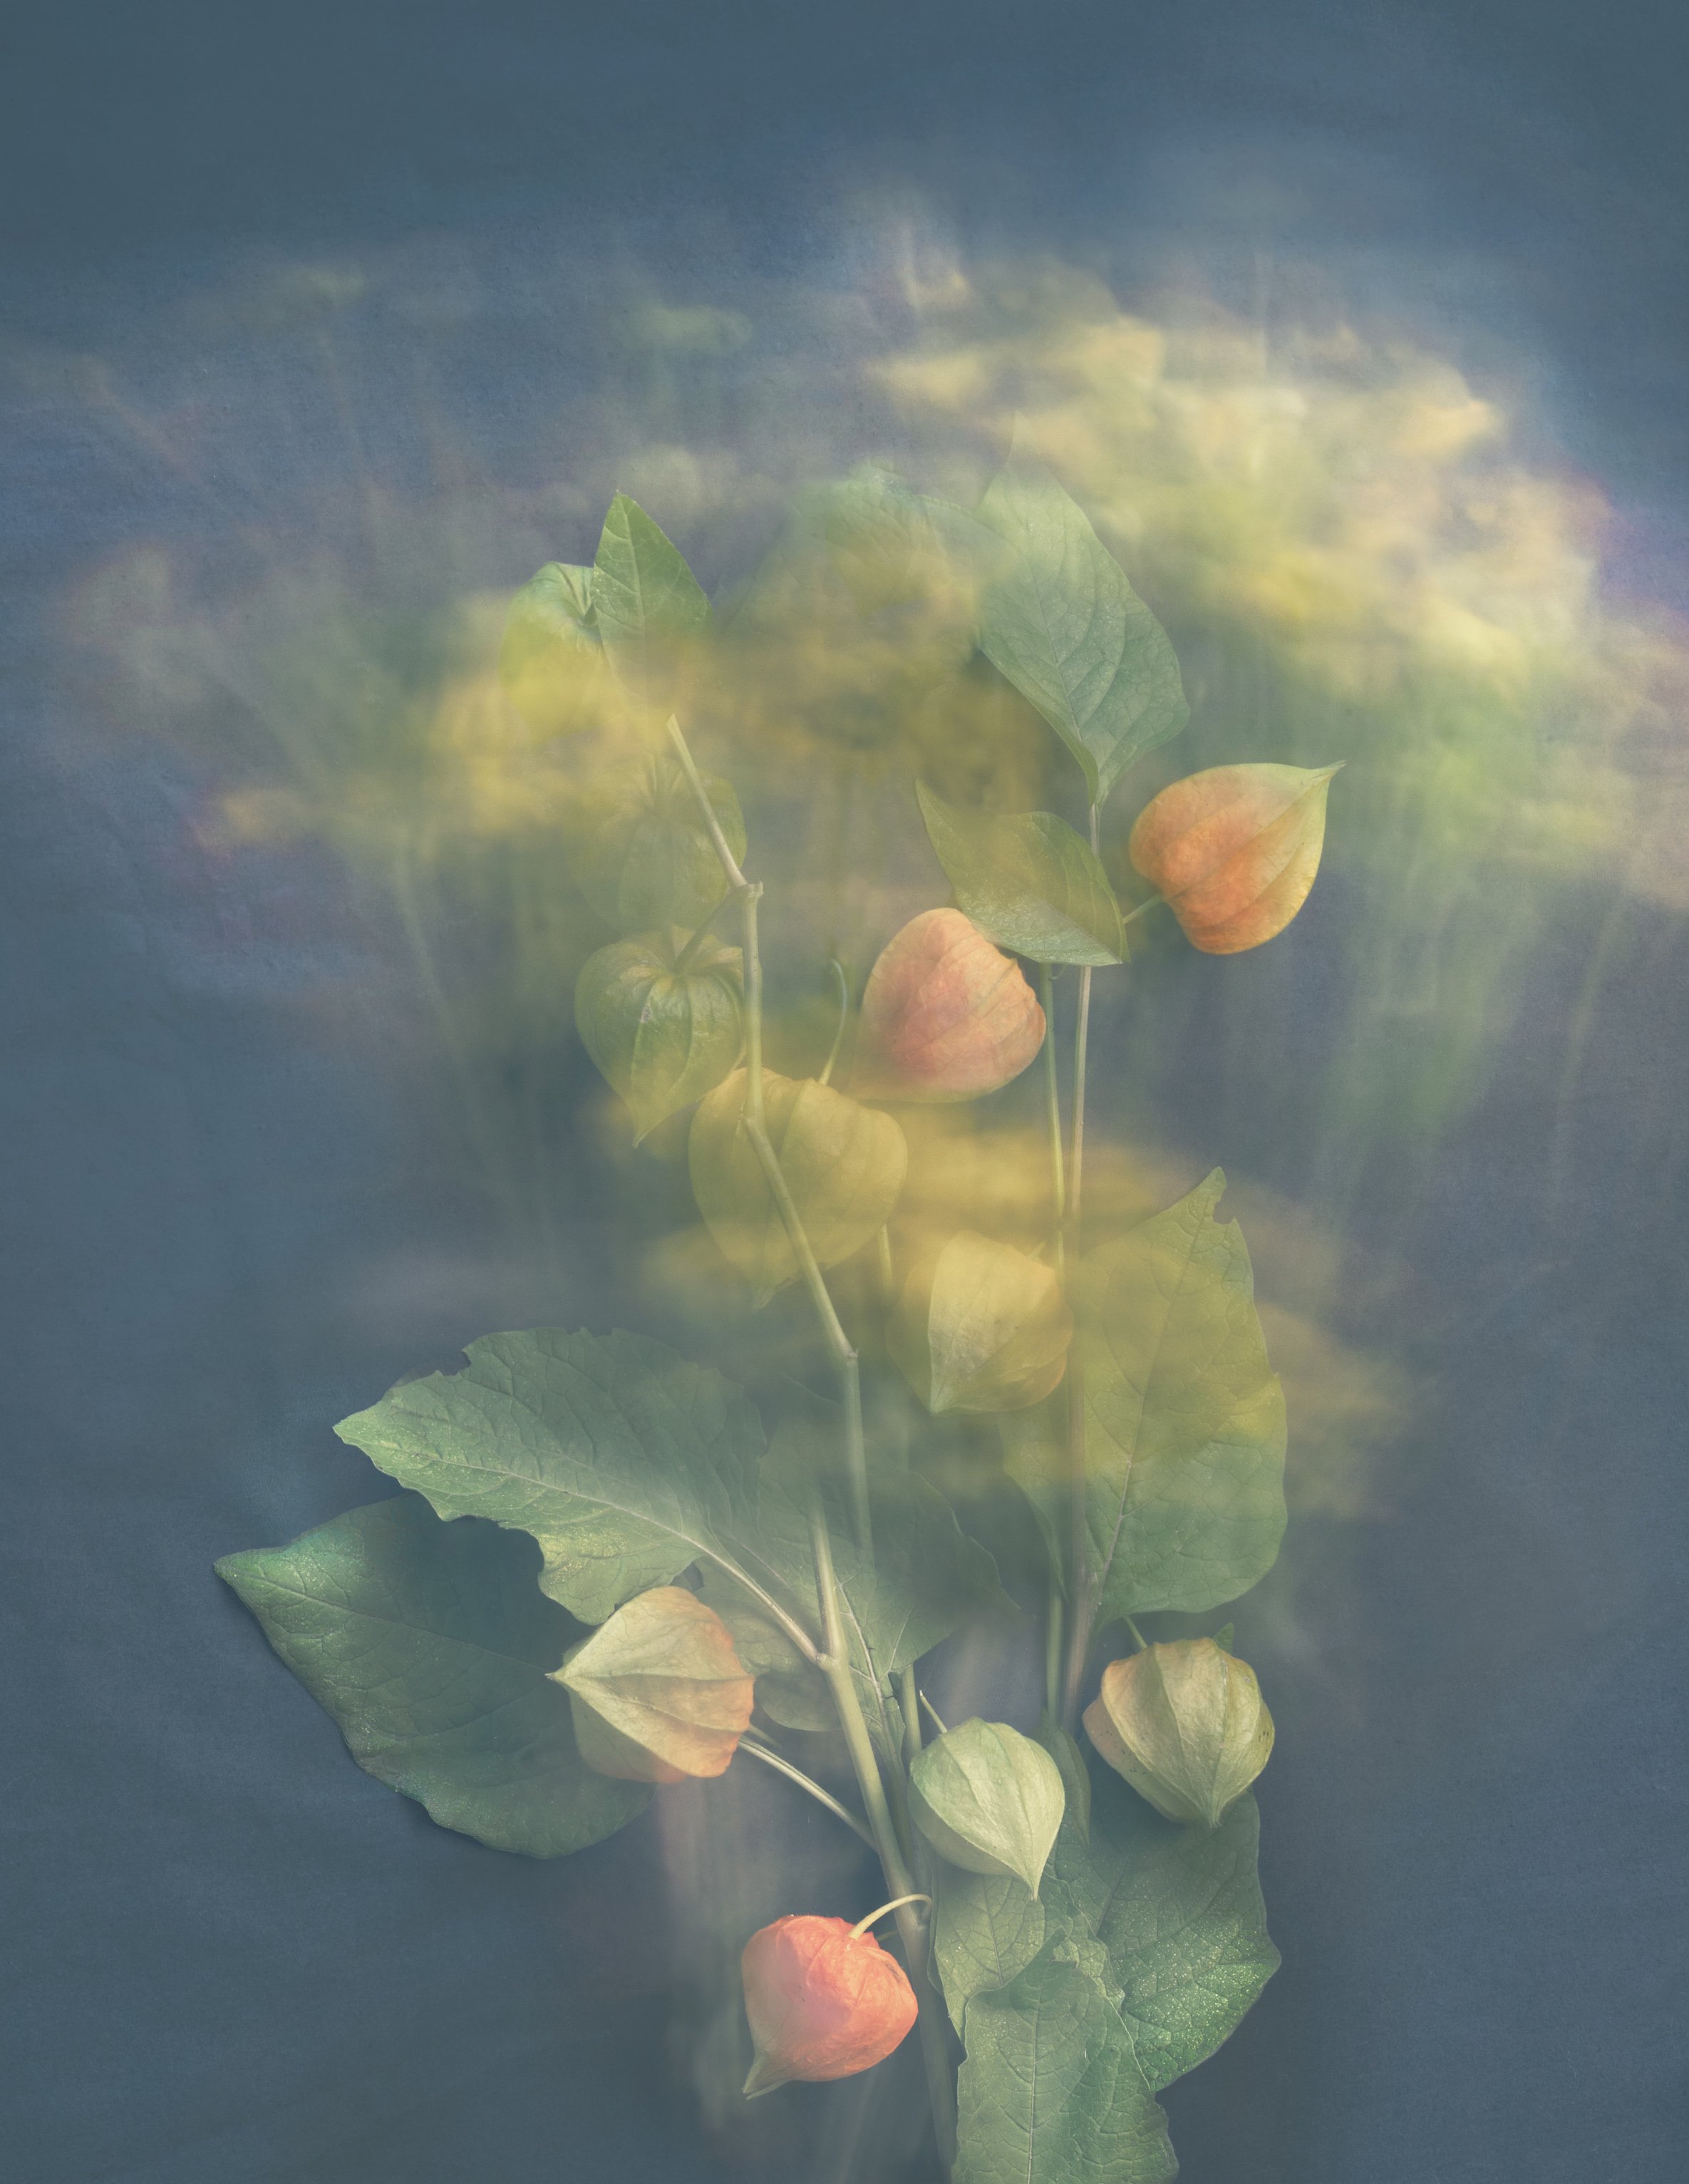 Joyce Tenneson, Radiant Chinese Lanterns, 2/10, 2021, Archival pigment prints, 22 x 17 inches, $1,900.